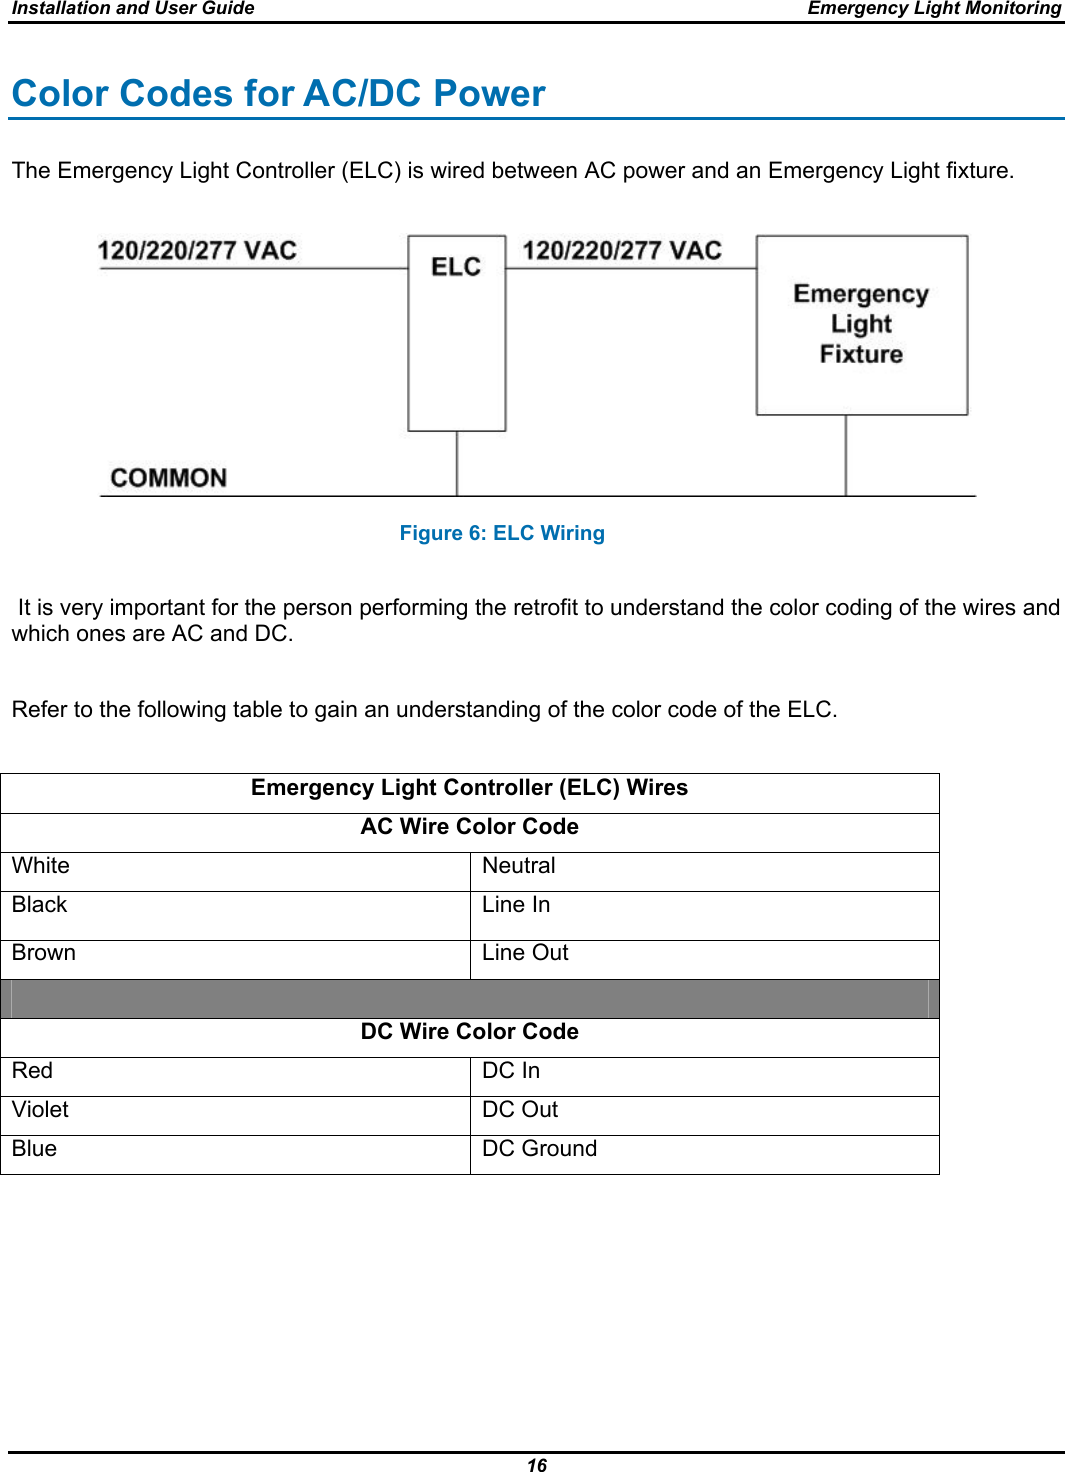 Installation and User Guide  Emergency Light Monitoring 16  Color Codes for AC/DC Power The Emergency Light Controller (ELC) is wired between AC power and an Emergency Light fixture.                                                                      Figure 6: ELC Wiring   It is very important for the person performing the retrofit to understand the color coding of the wires and which ones are AC and DC.  Refer to the following table to gain an understanding of the color code of the ELC.  Emergency Light Controller (ELC) Wires AC Wire Color Code White Neutral Black Line In Brown Line Out  DC Wire Color Code Red DC In Violet DC Out Blue DC Ground   